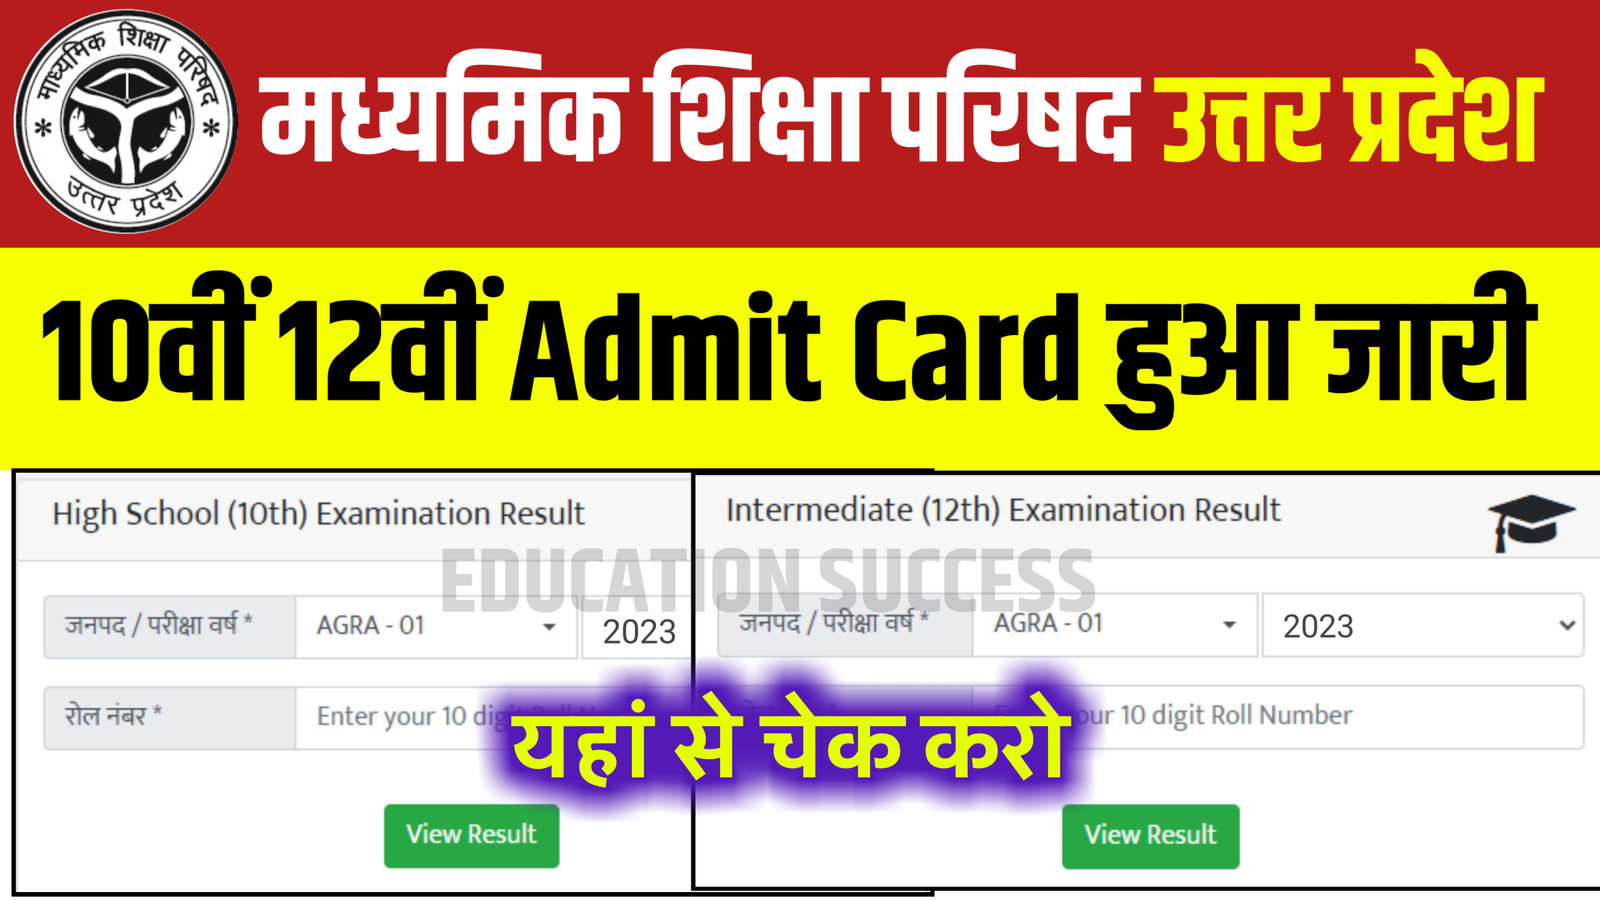 UP Board 10th 12th Admit Card Today Out Link Active: 